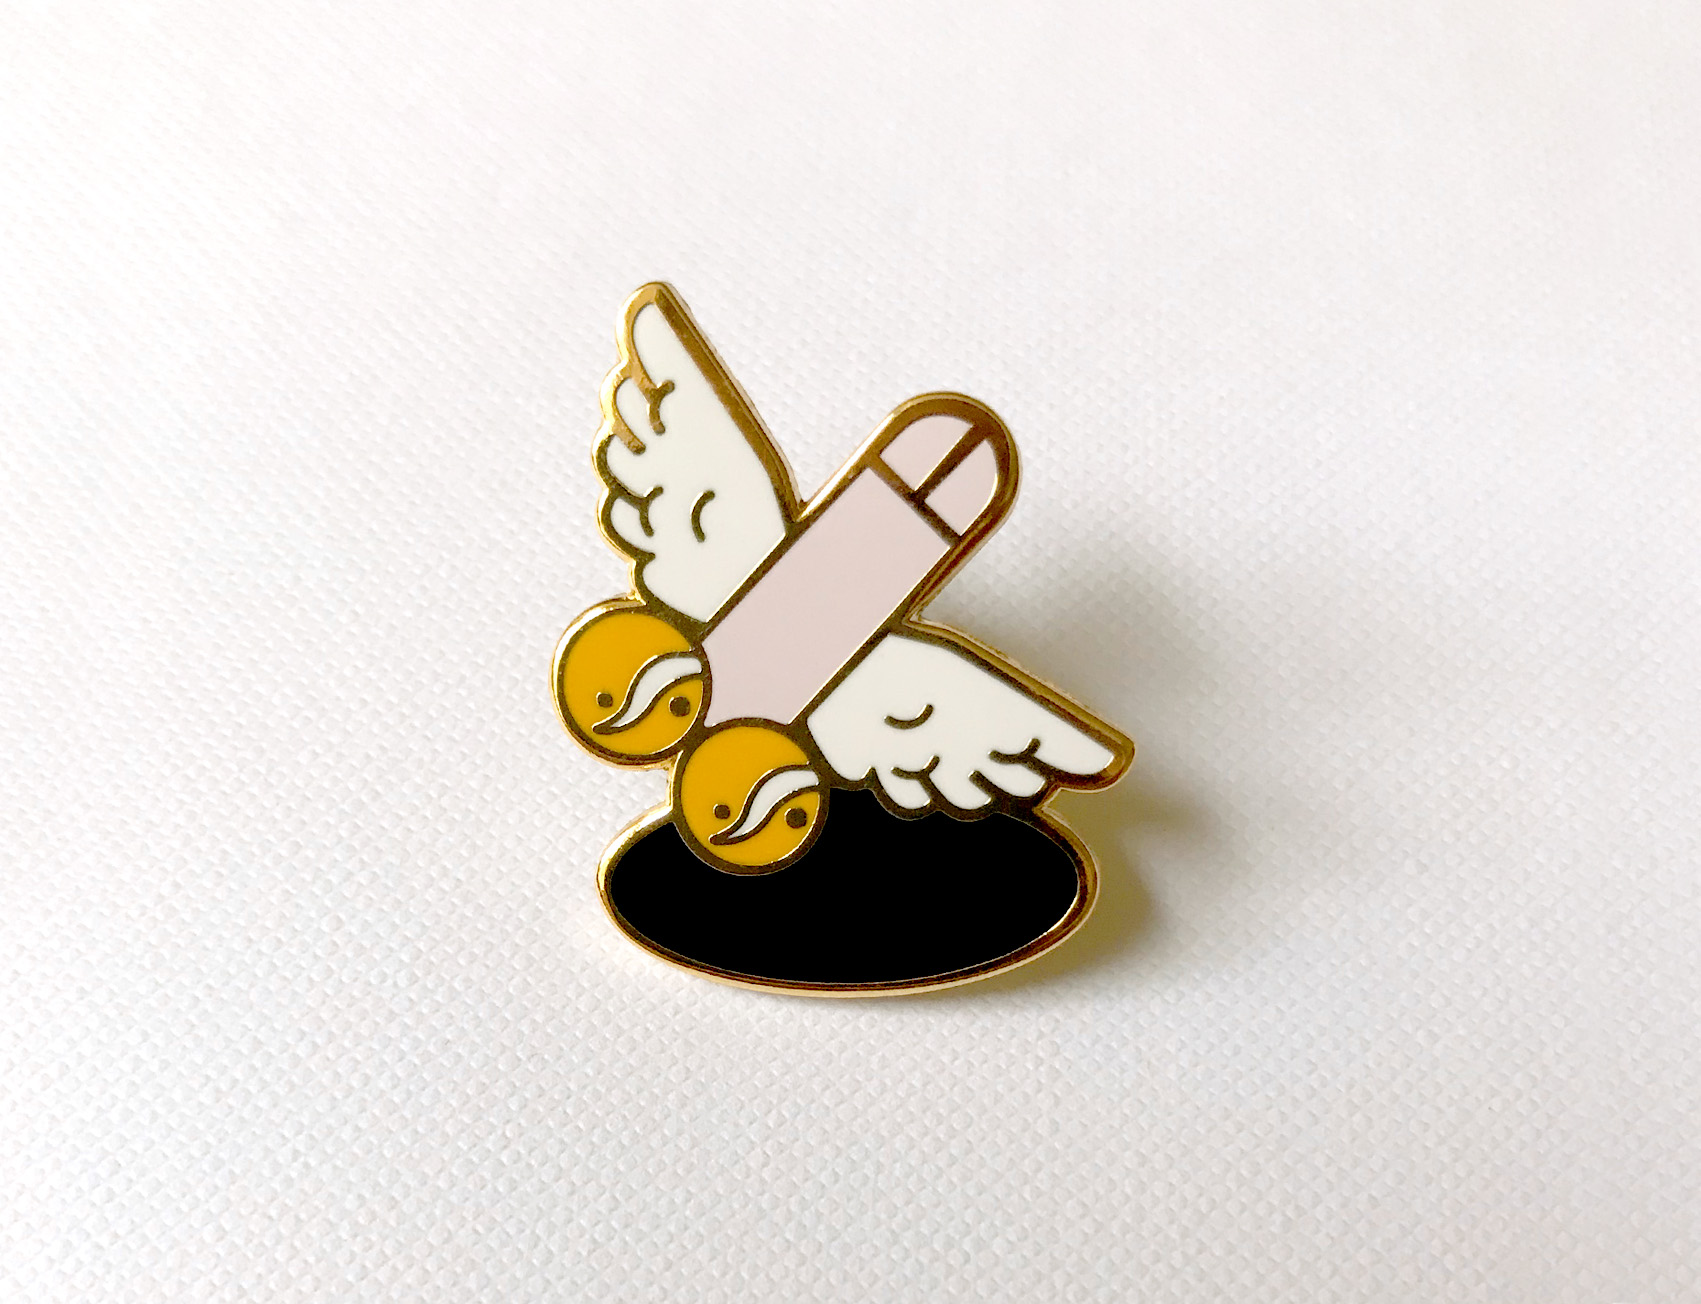 Copy of Copy of Marble Pins - Flying Dick